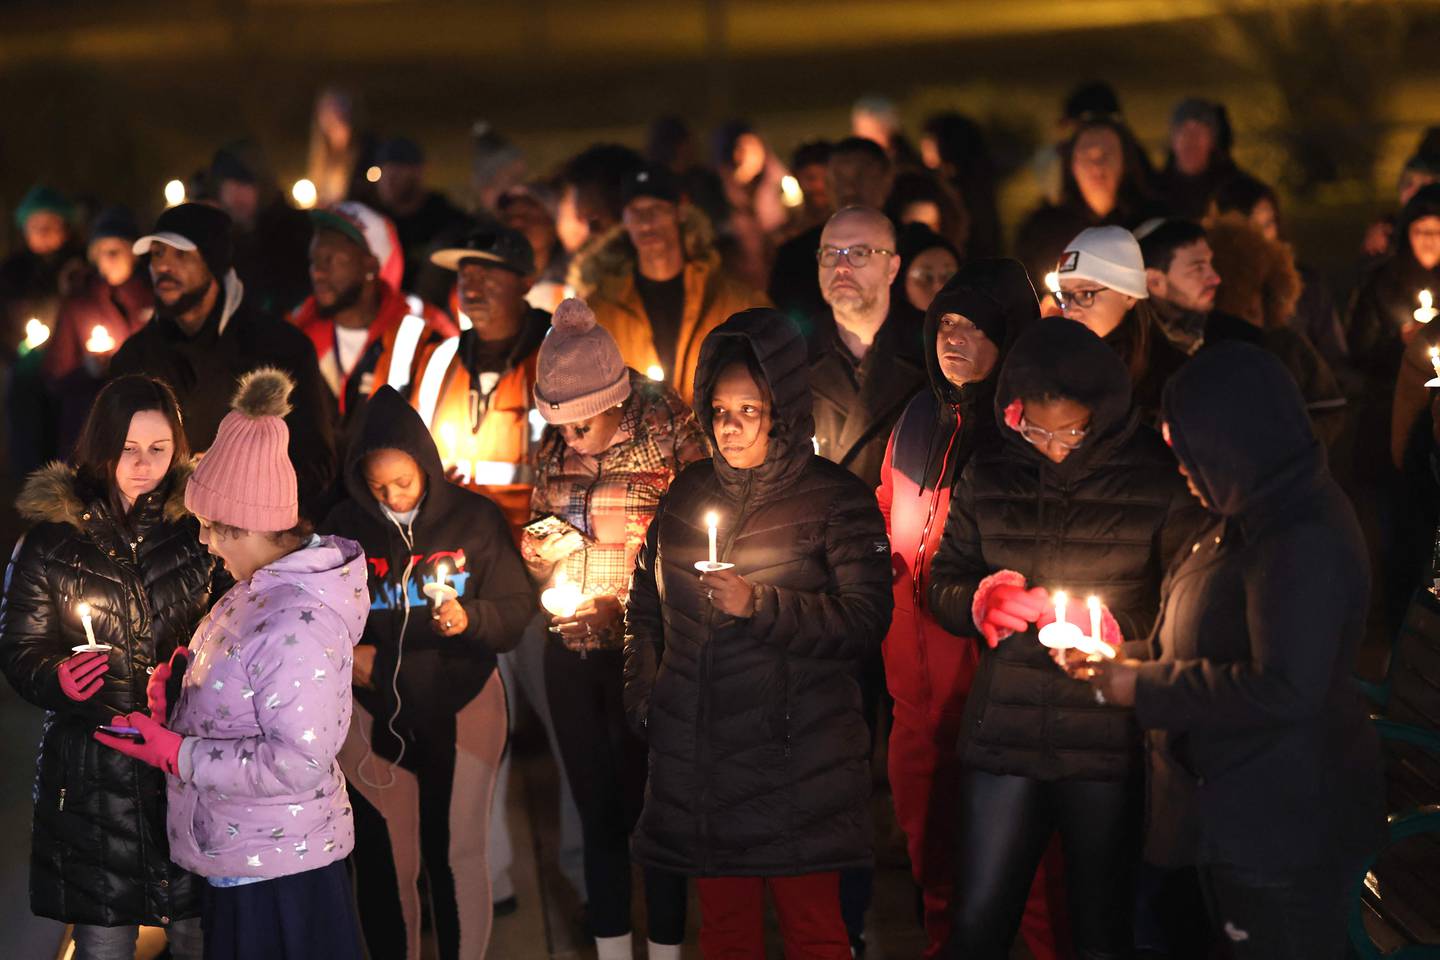 People attend a candlelight vigil for Tyre Nichols on Thursday in Memphis, Tennessee. Getty / AFP